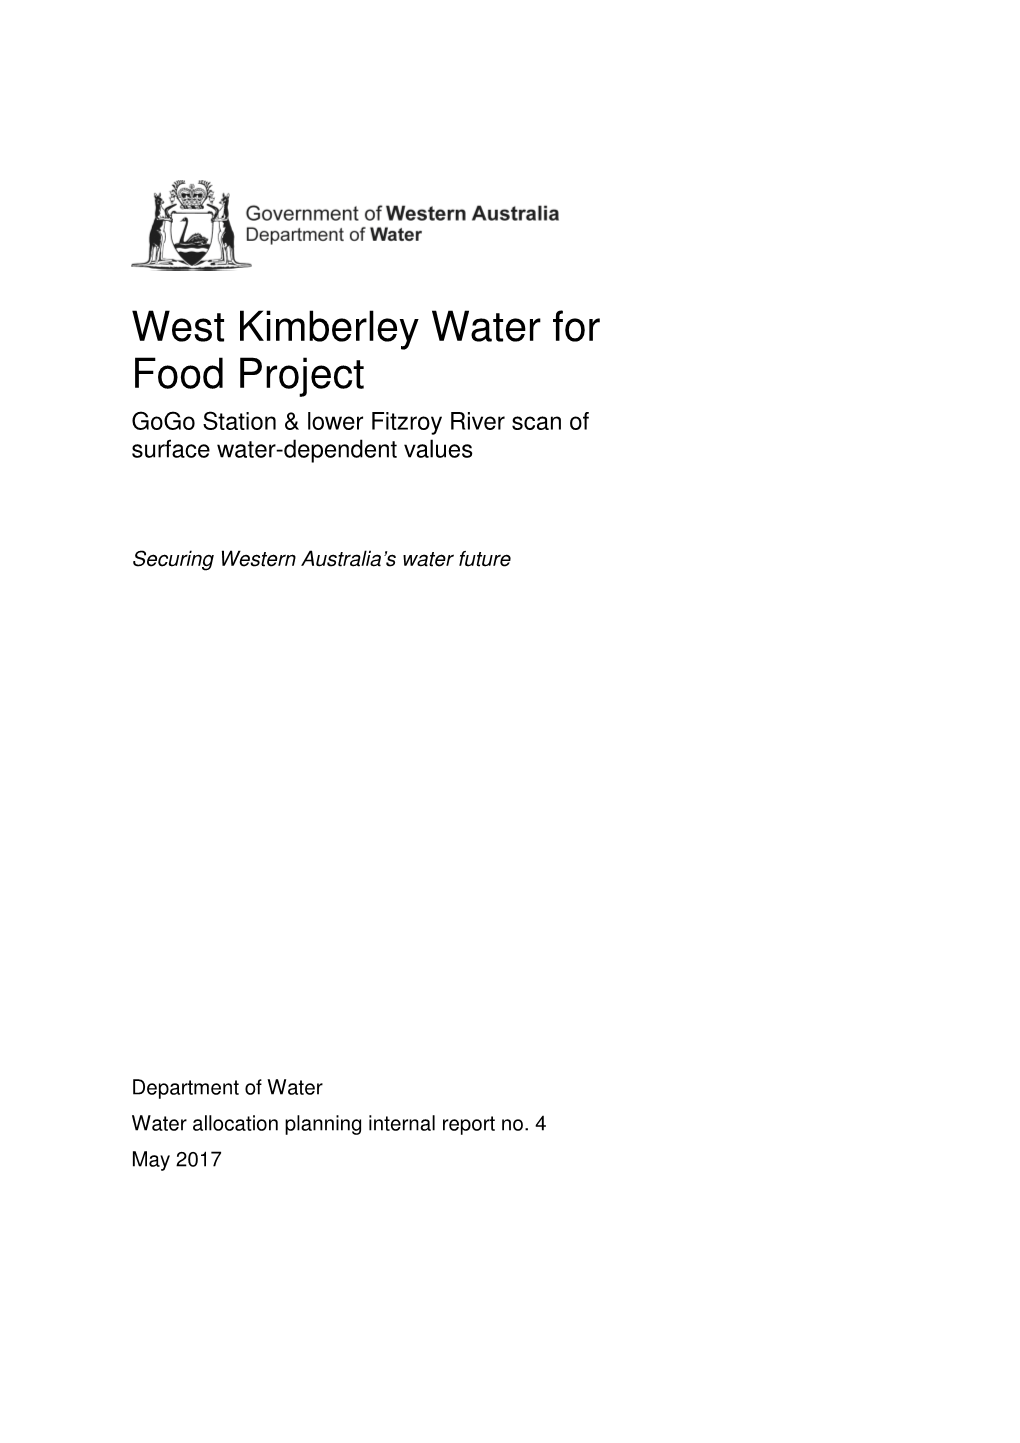 West Kimberley Water for Food Project Gogo Station & Lower Fitzroy River Scan of Surface Water-Dependent Values